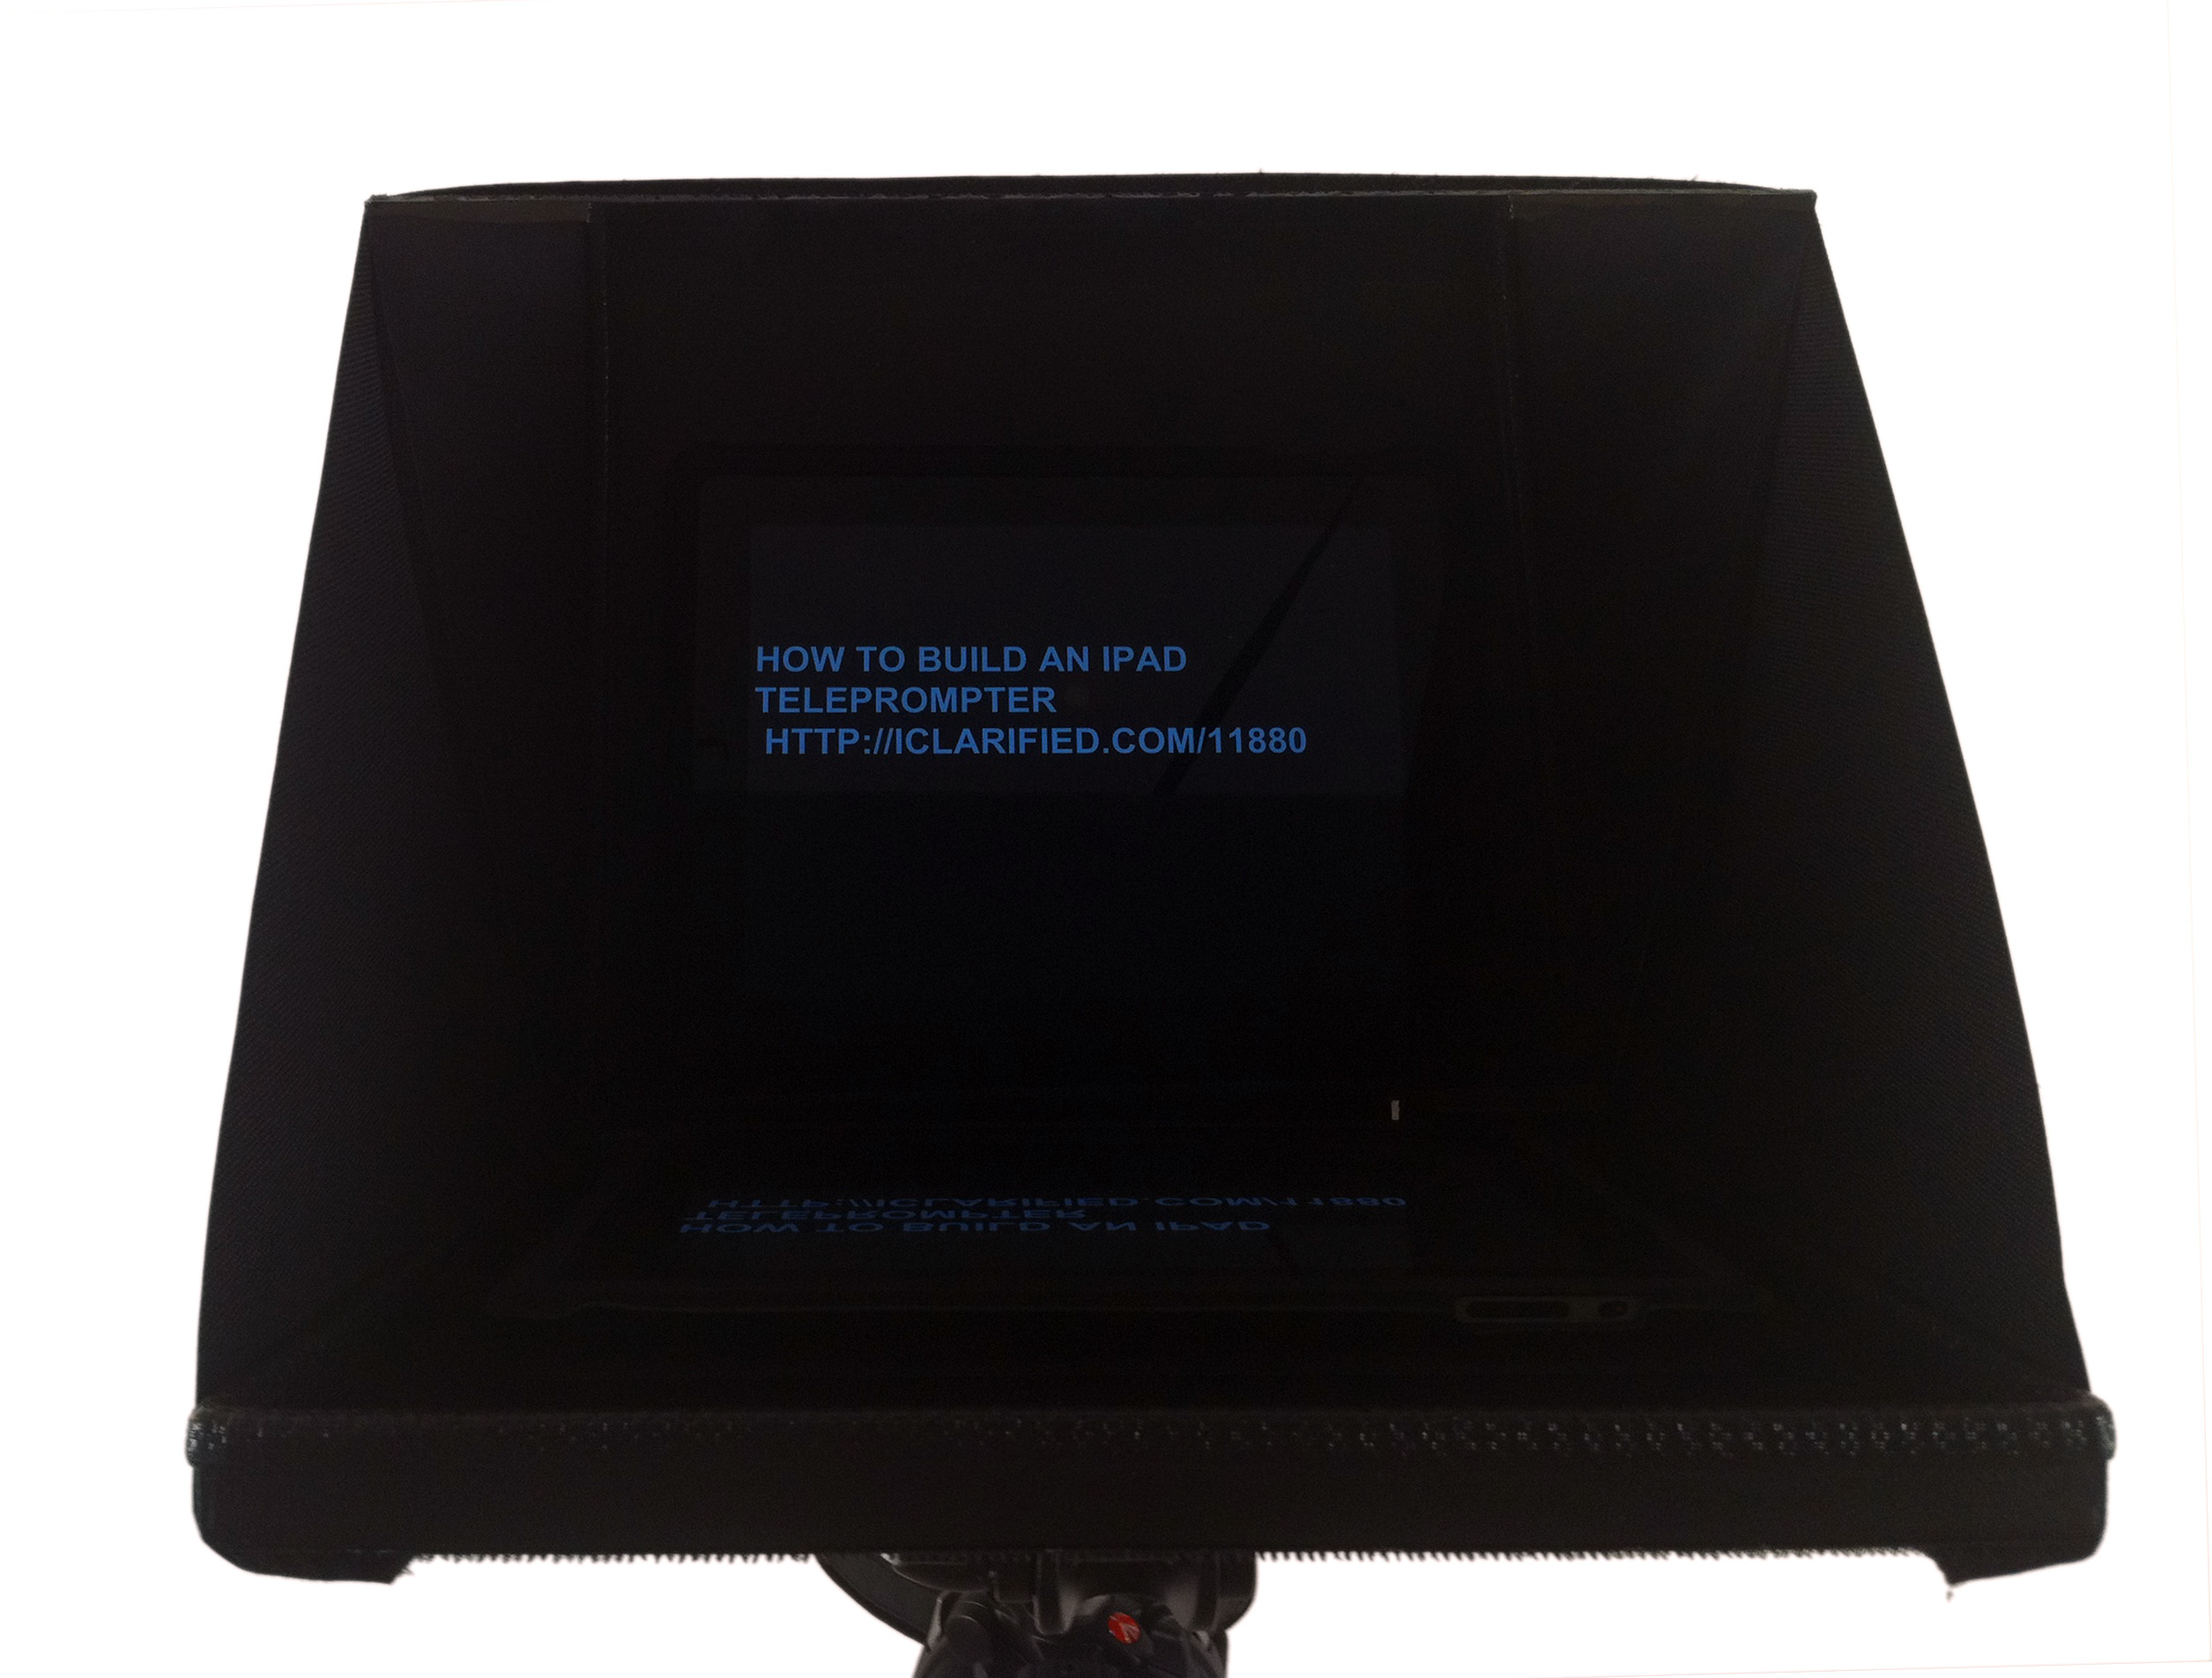 How to Build an iPad Teleprompter [DIY]